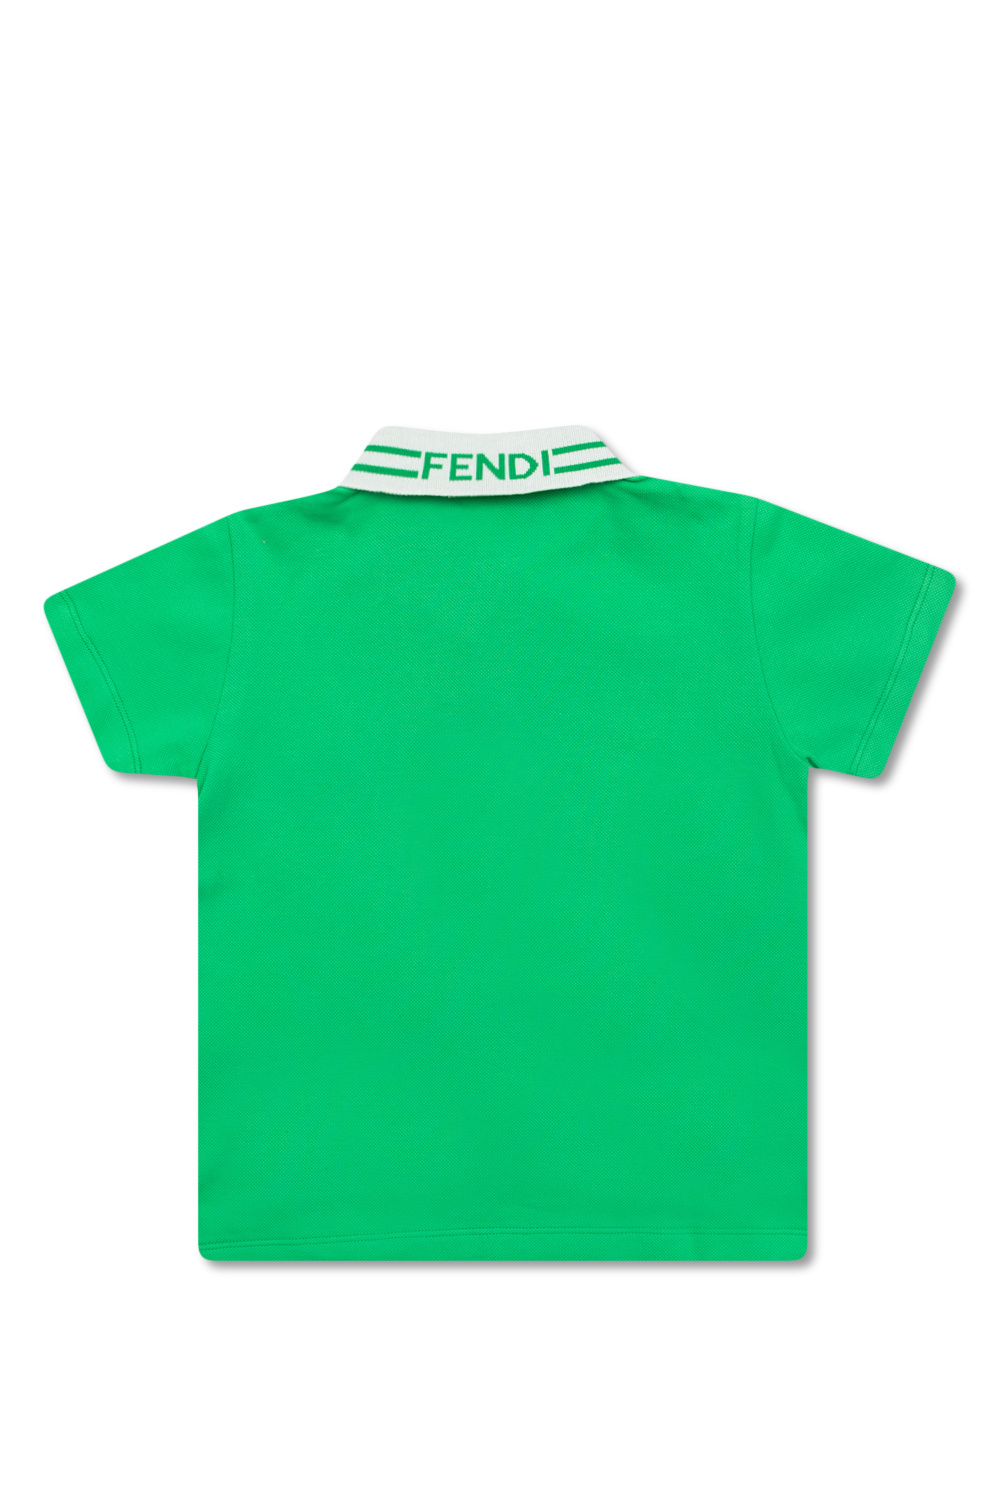 Fendi Kids rib polo with branded collar in blue